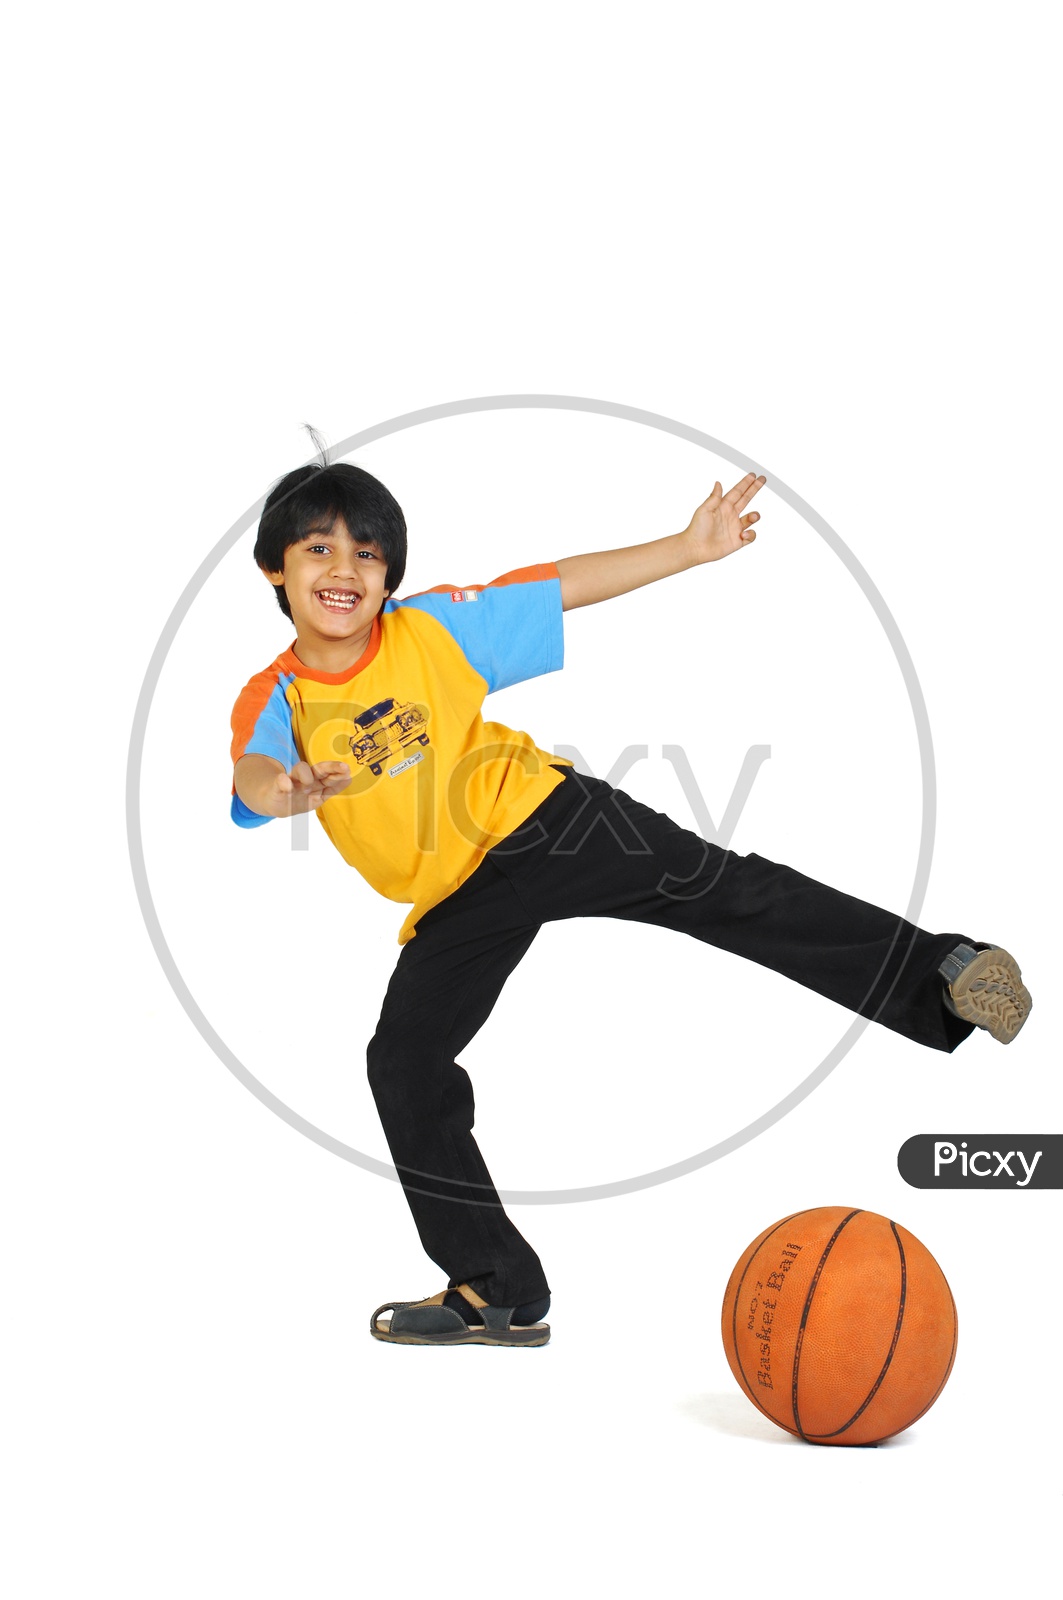 An Indian boy playing with basketball in white background